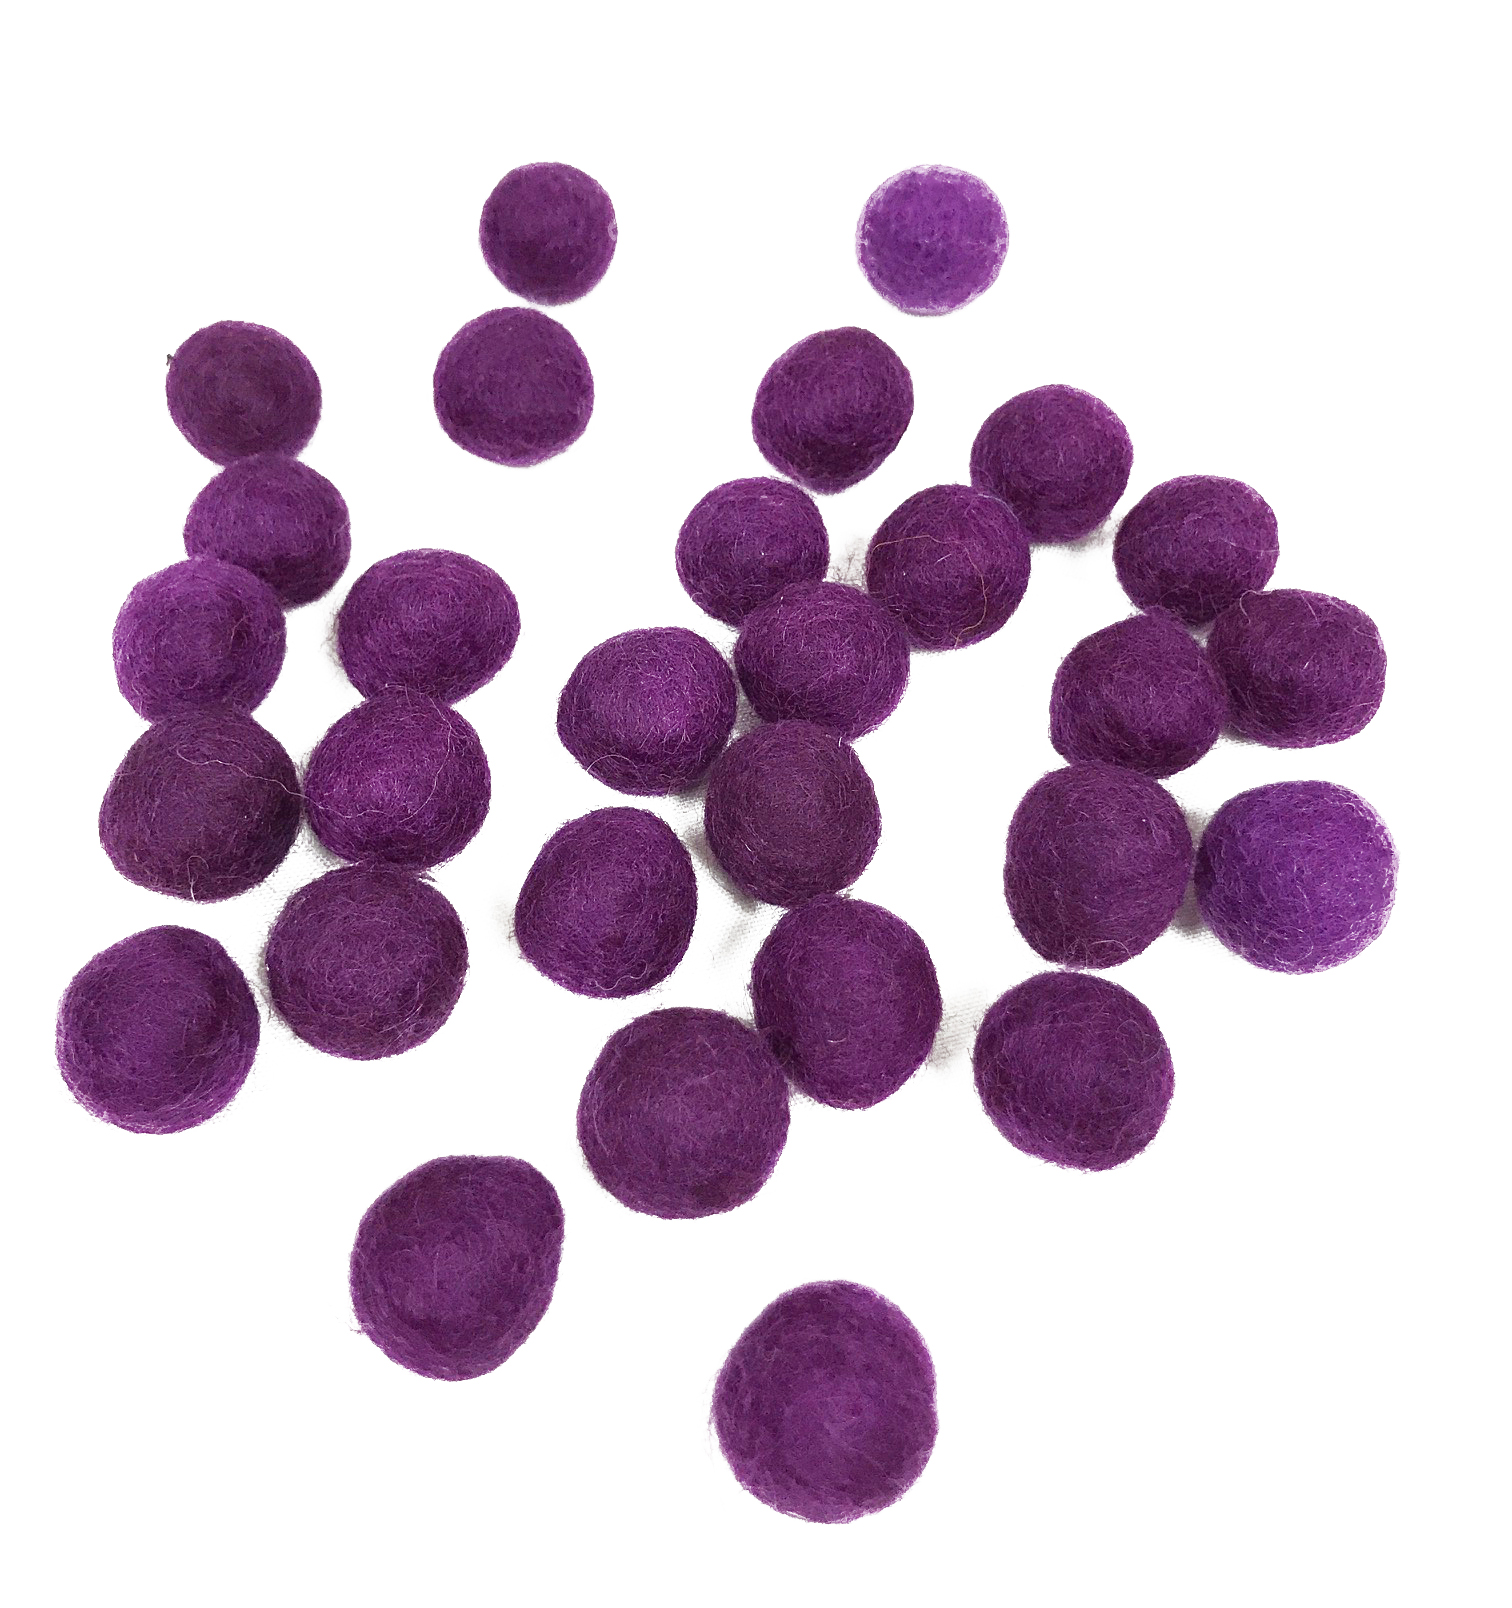 Yarn Place Felt Balls - 100 Pure Wool Beads 20mm Eggplant - Click Image to Close